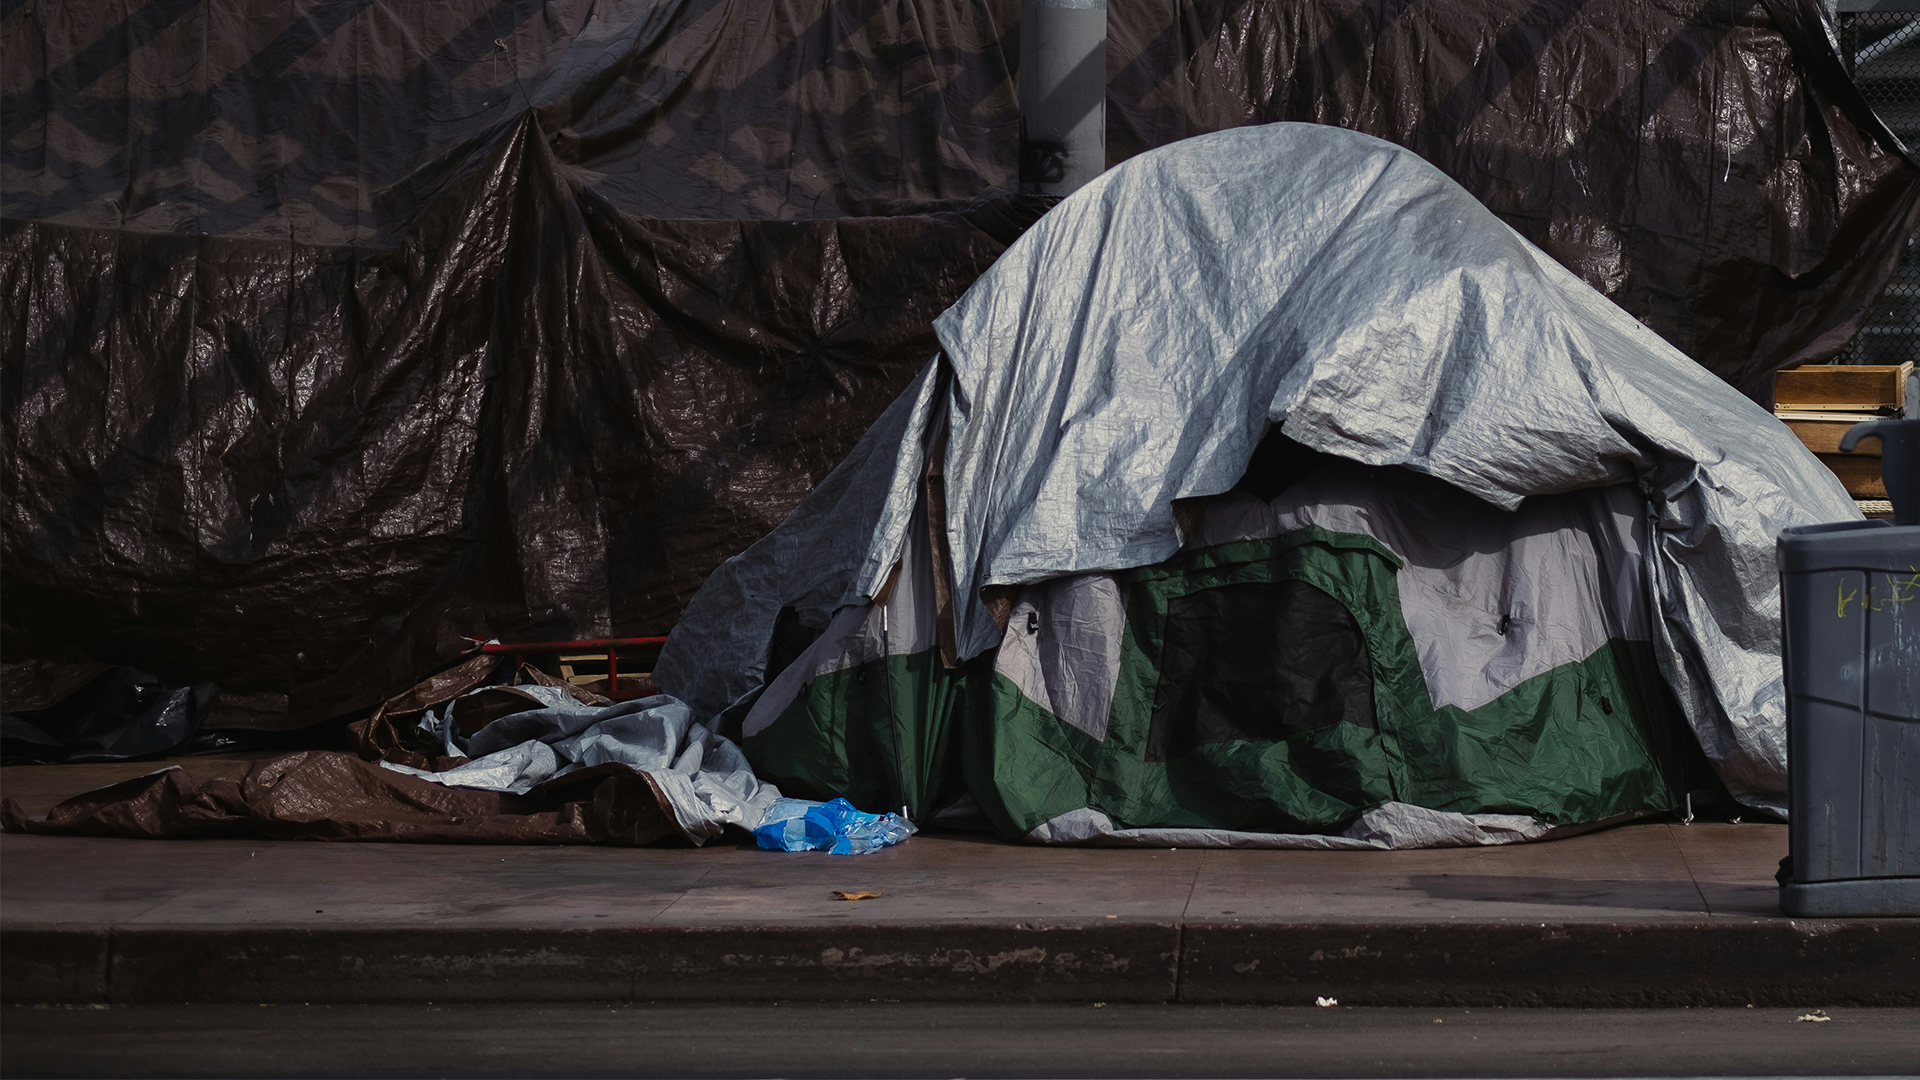 A homeless camp, with a green and silver tent and black tarp are set up along a sidewalk.